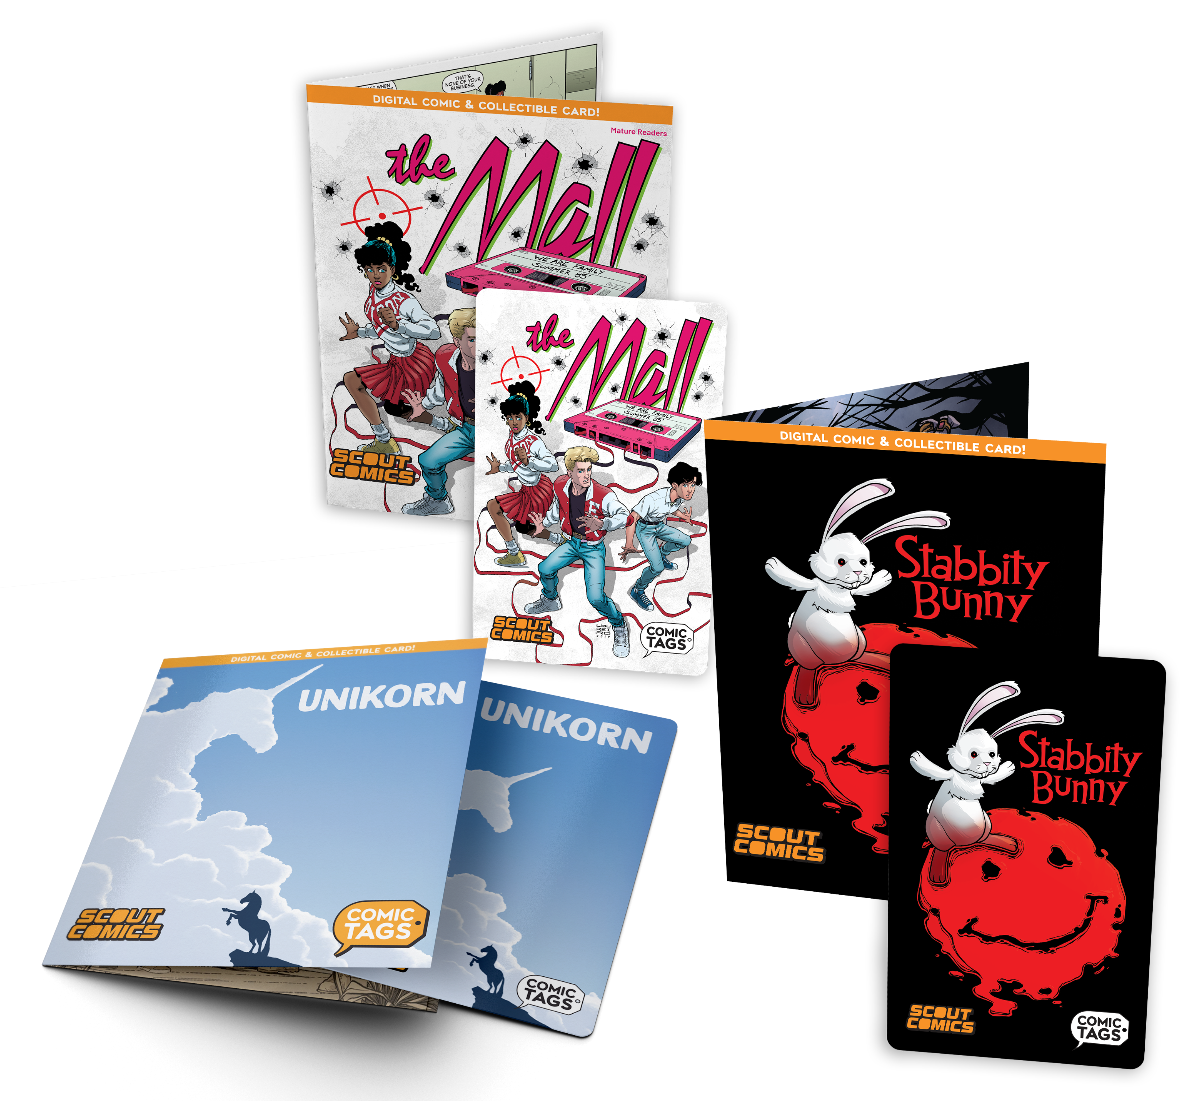 Scout Comics and Entertainment Inc. to launch Comic Tags